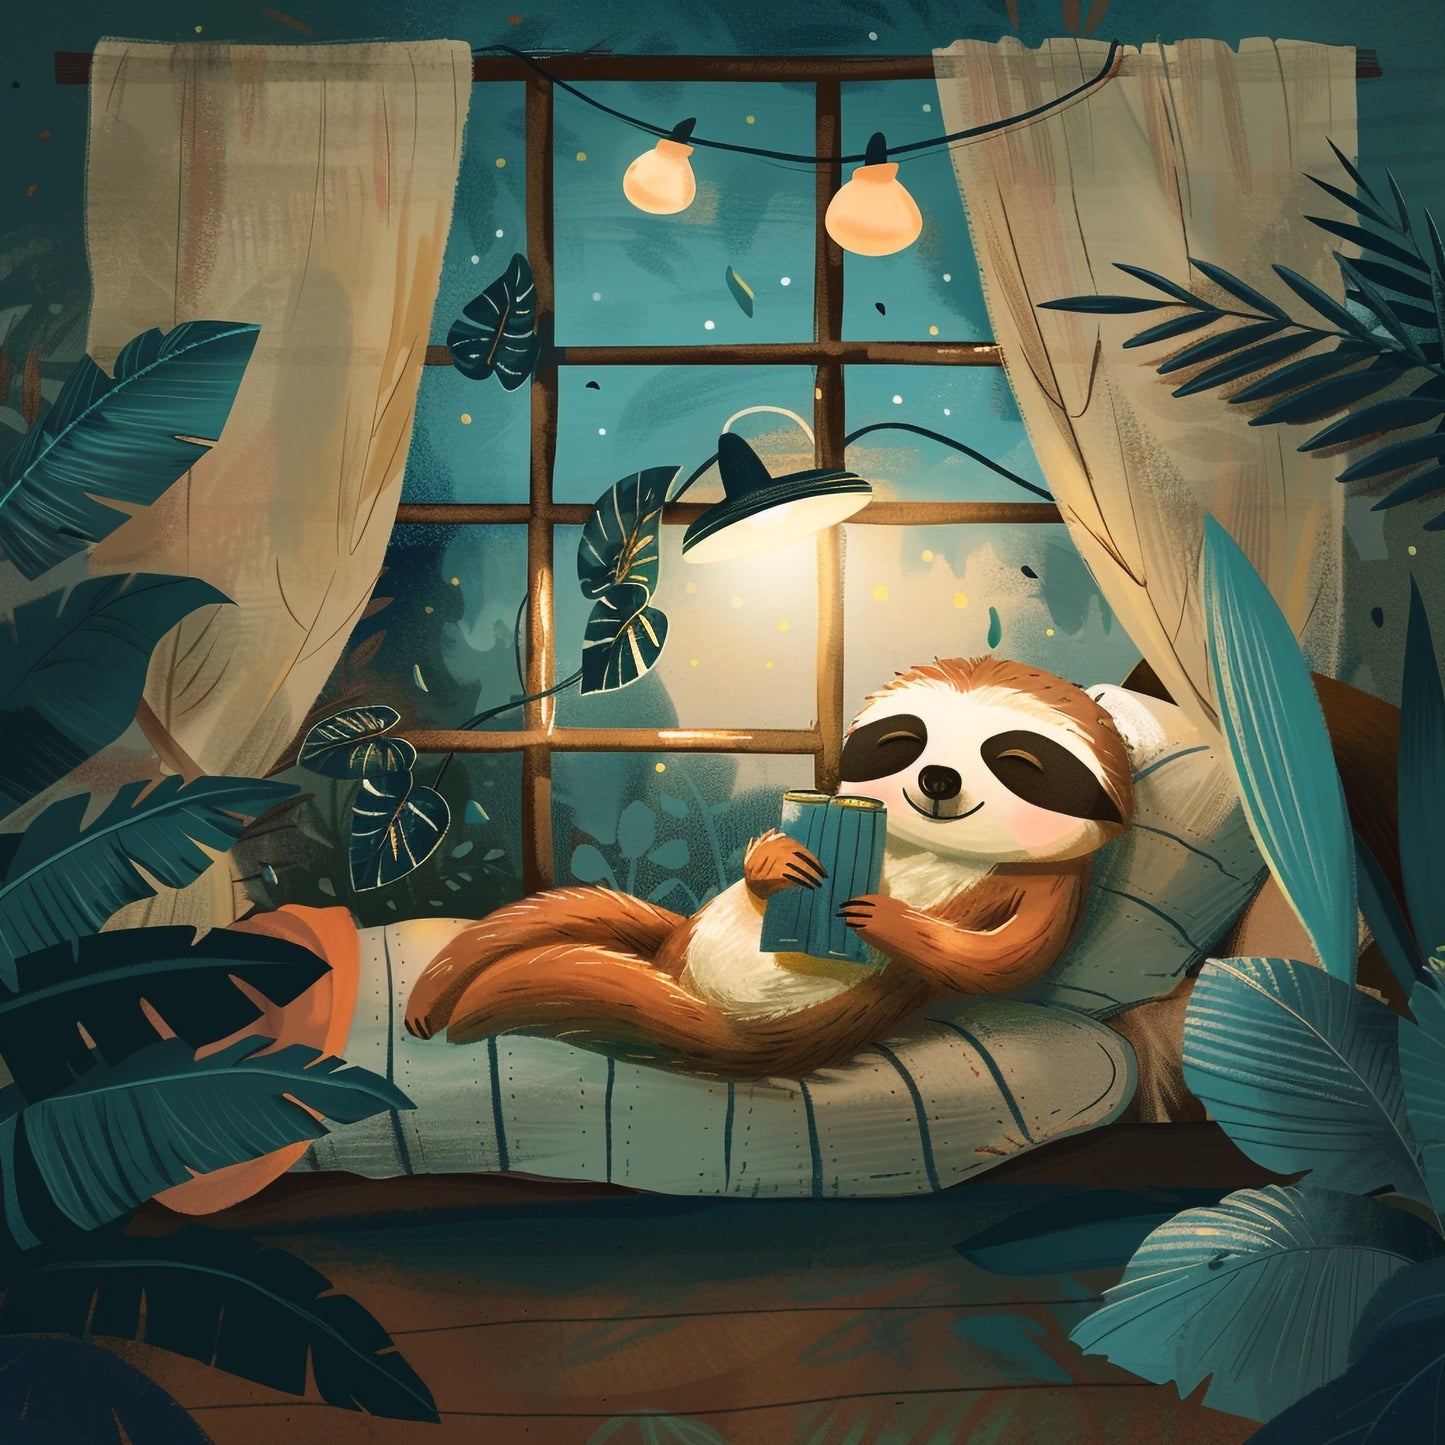 Relaxed Sloth Reading a Book in a Cozy Evening Bedroom